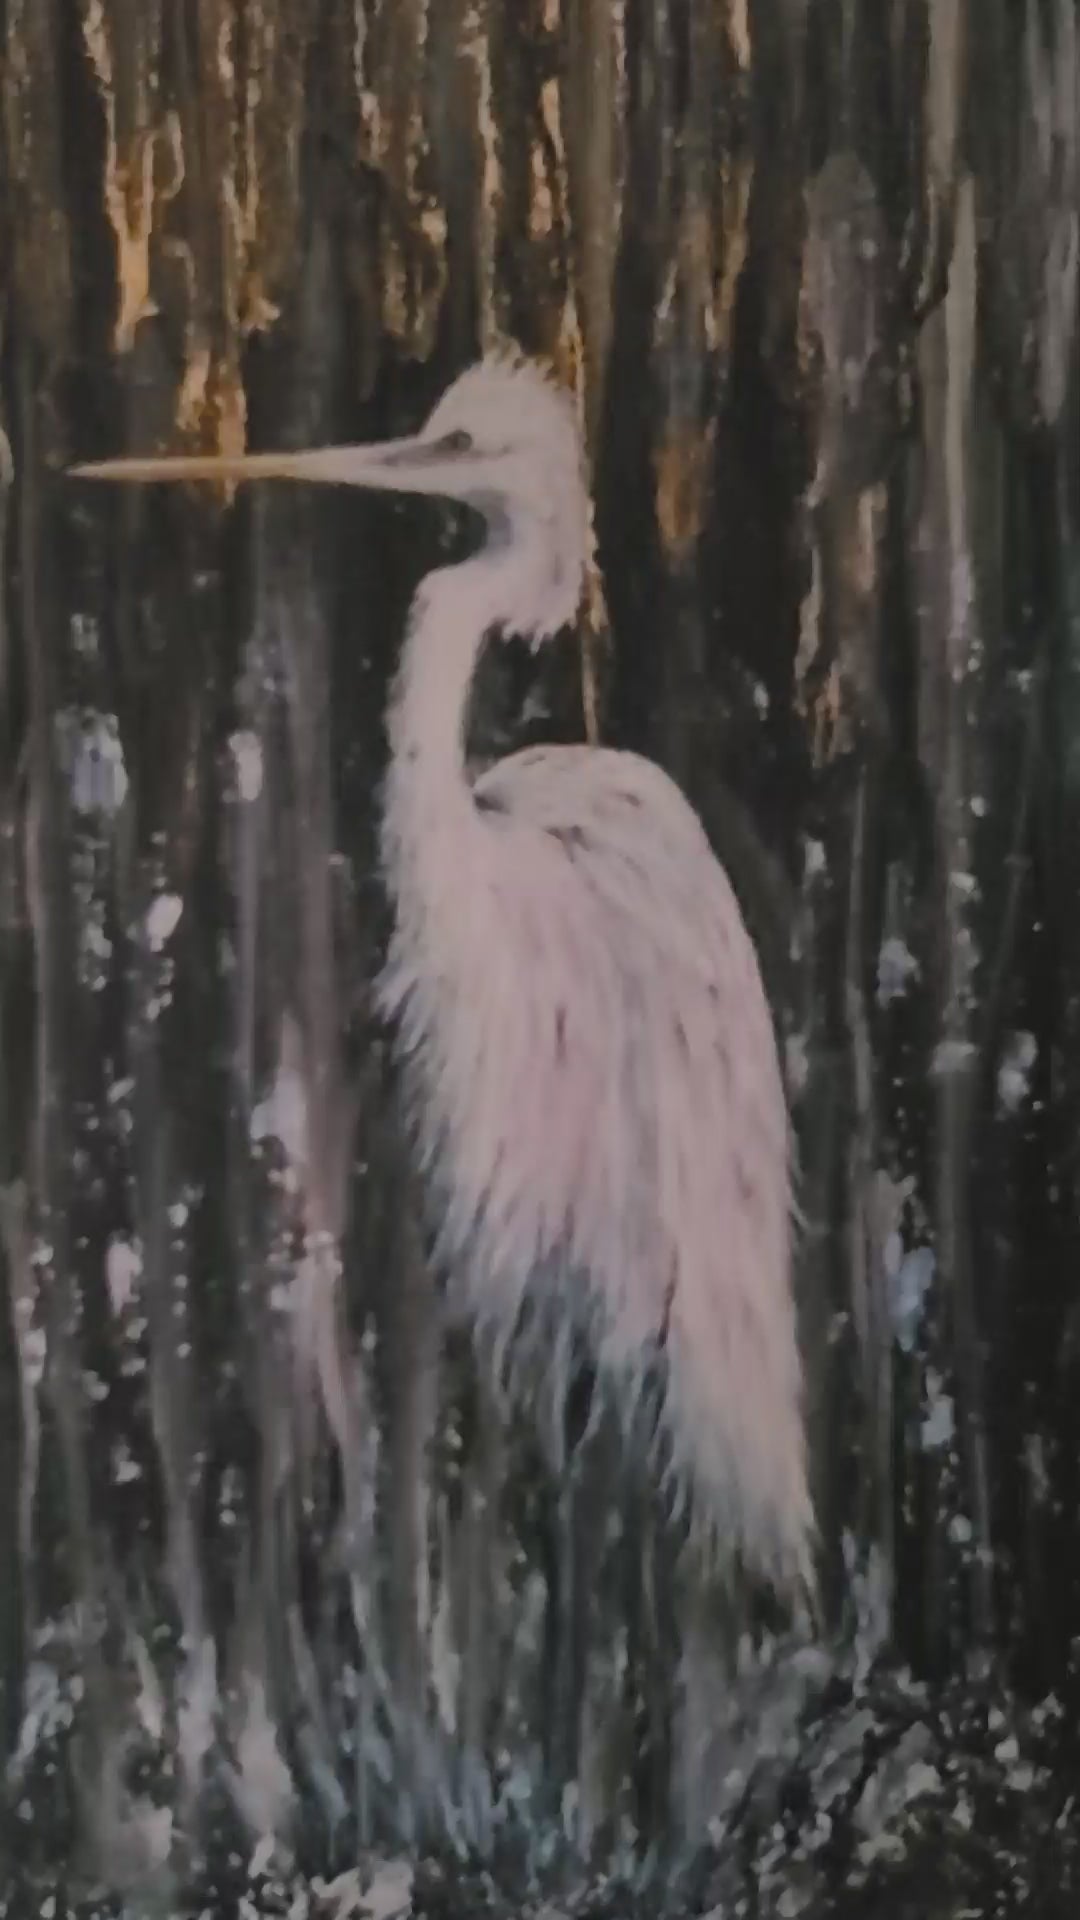 Video of mesmerizing artwork, depicting a stunning painting of a white heron majestically standing in the rain by the artist, The Artful Lynk, Fine Art by Lynda Krupa.